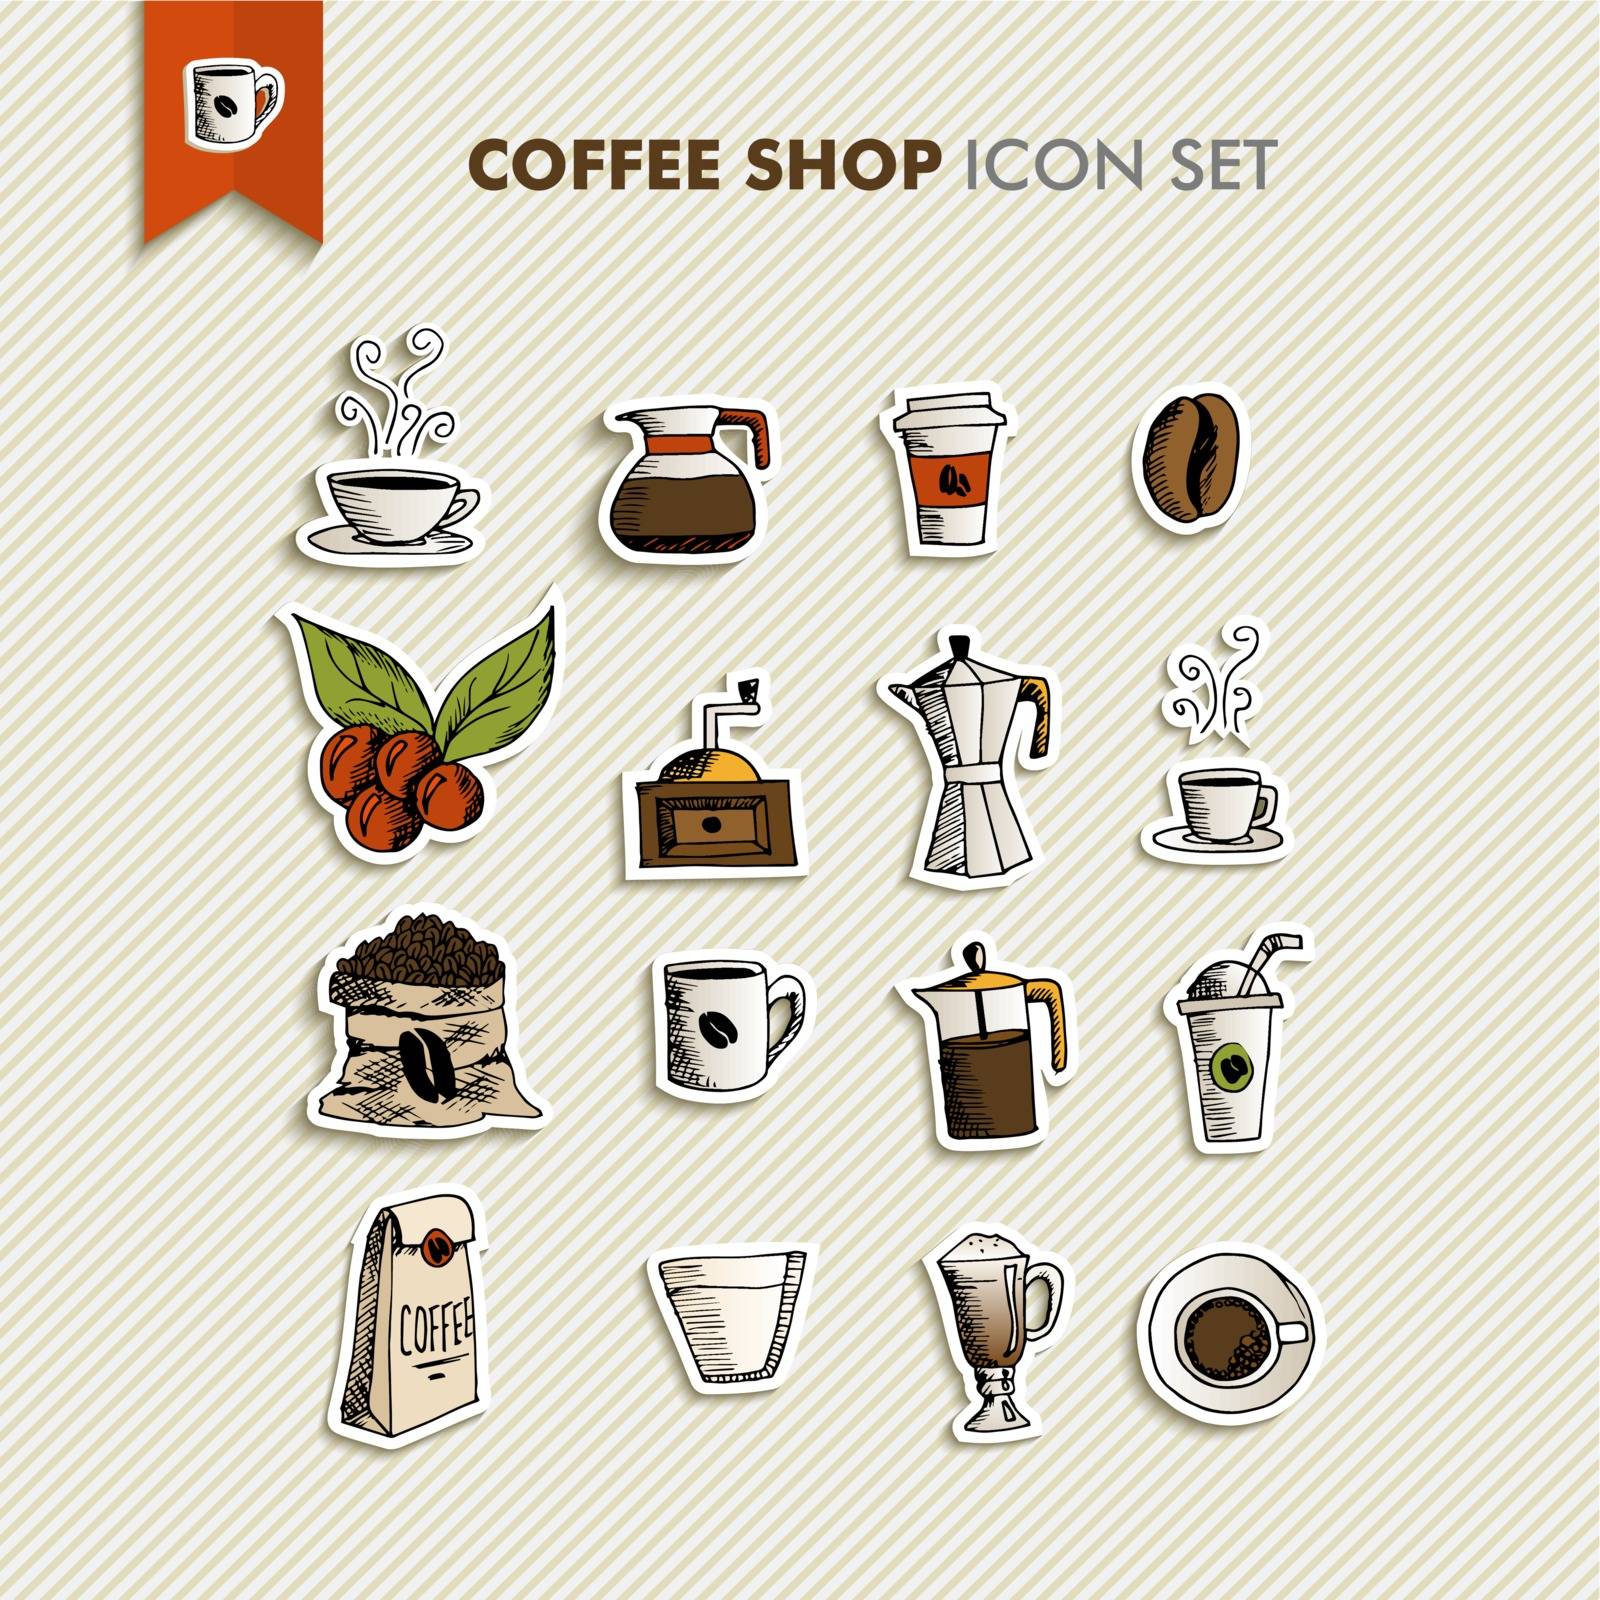 Hand drawn coffee shop icons set design. Menu, website and app elements. EPS10 vector file organized in layers for easy editing.